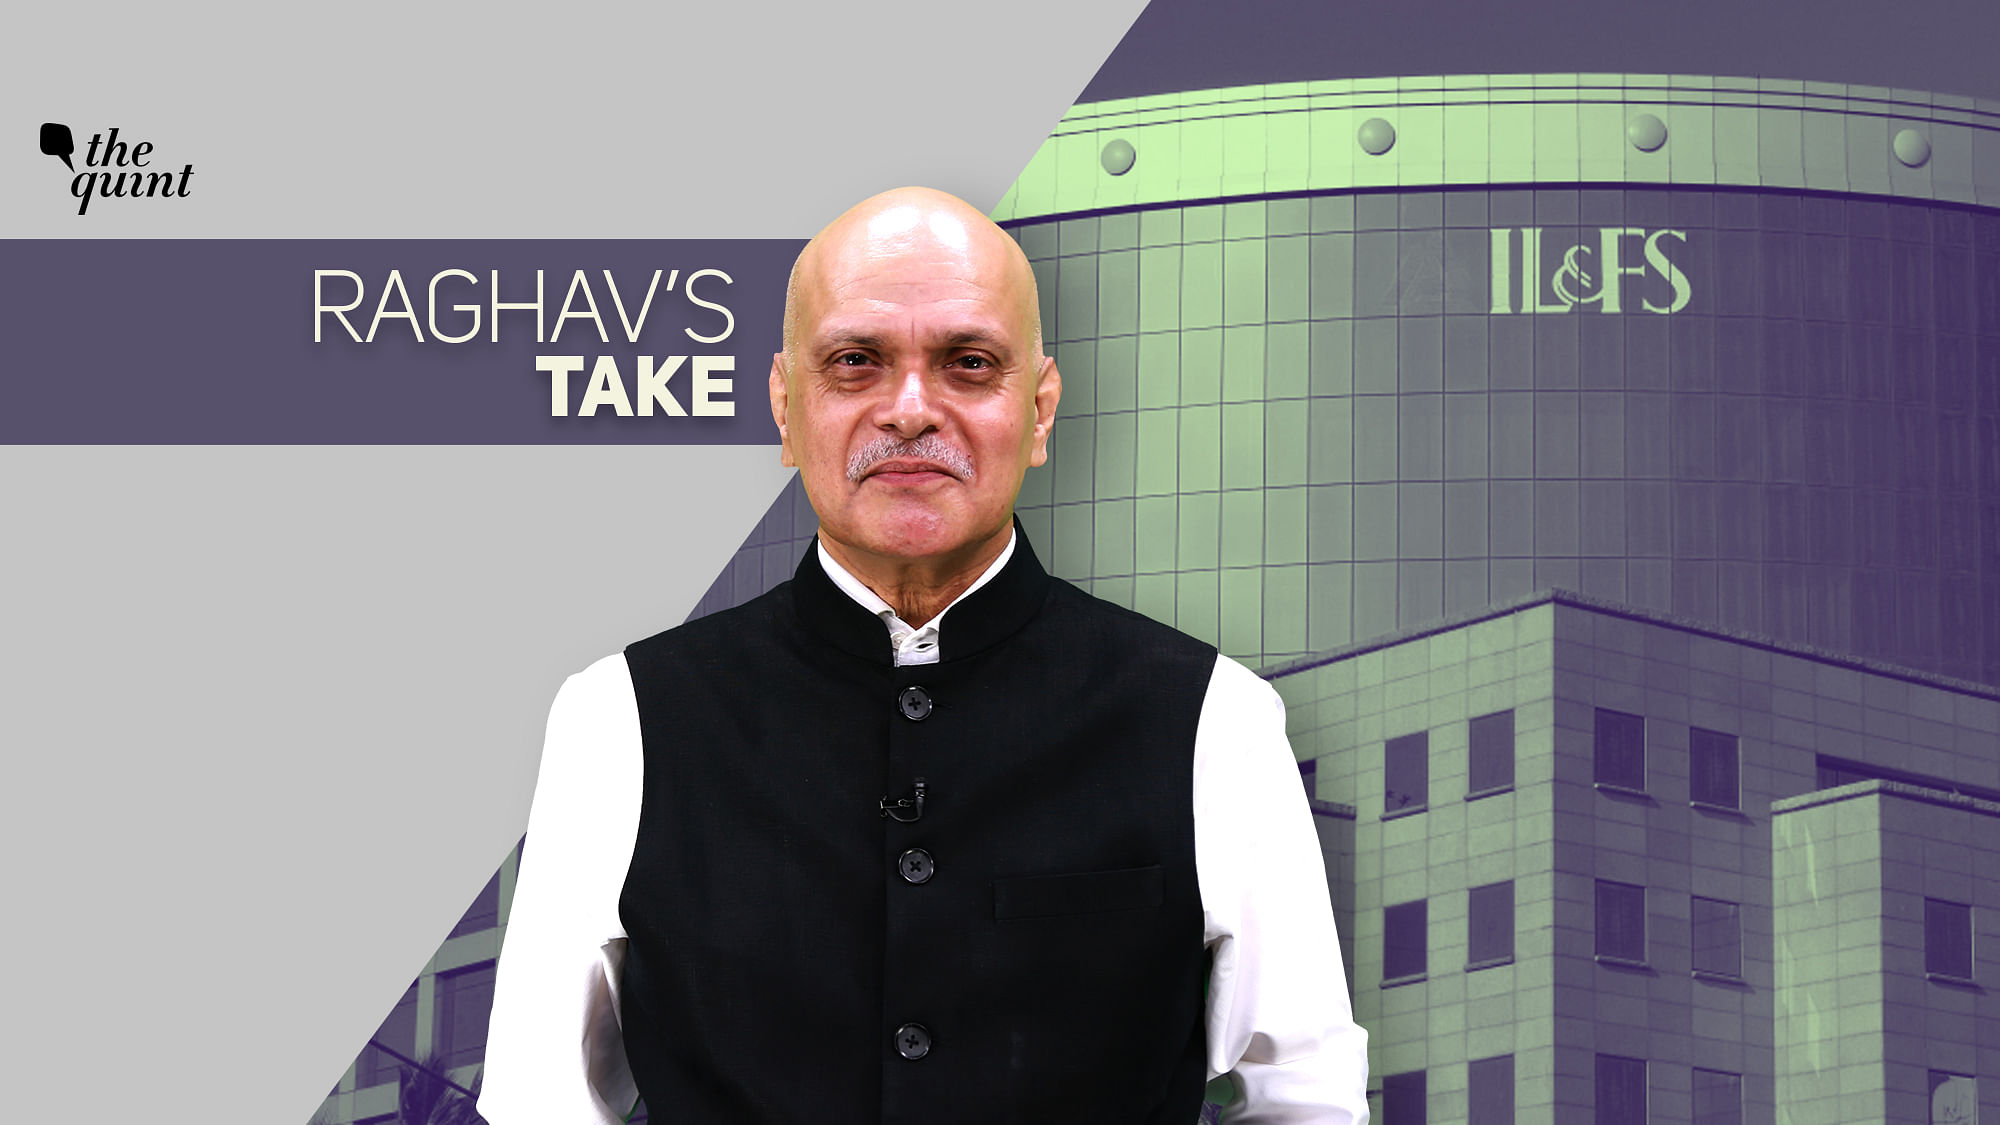 Raghav Bahl explains why even after a year, the ILFS crisis is still causing damage across the Indian economy.